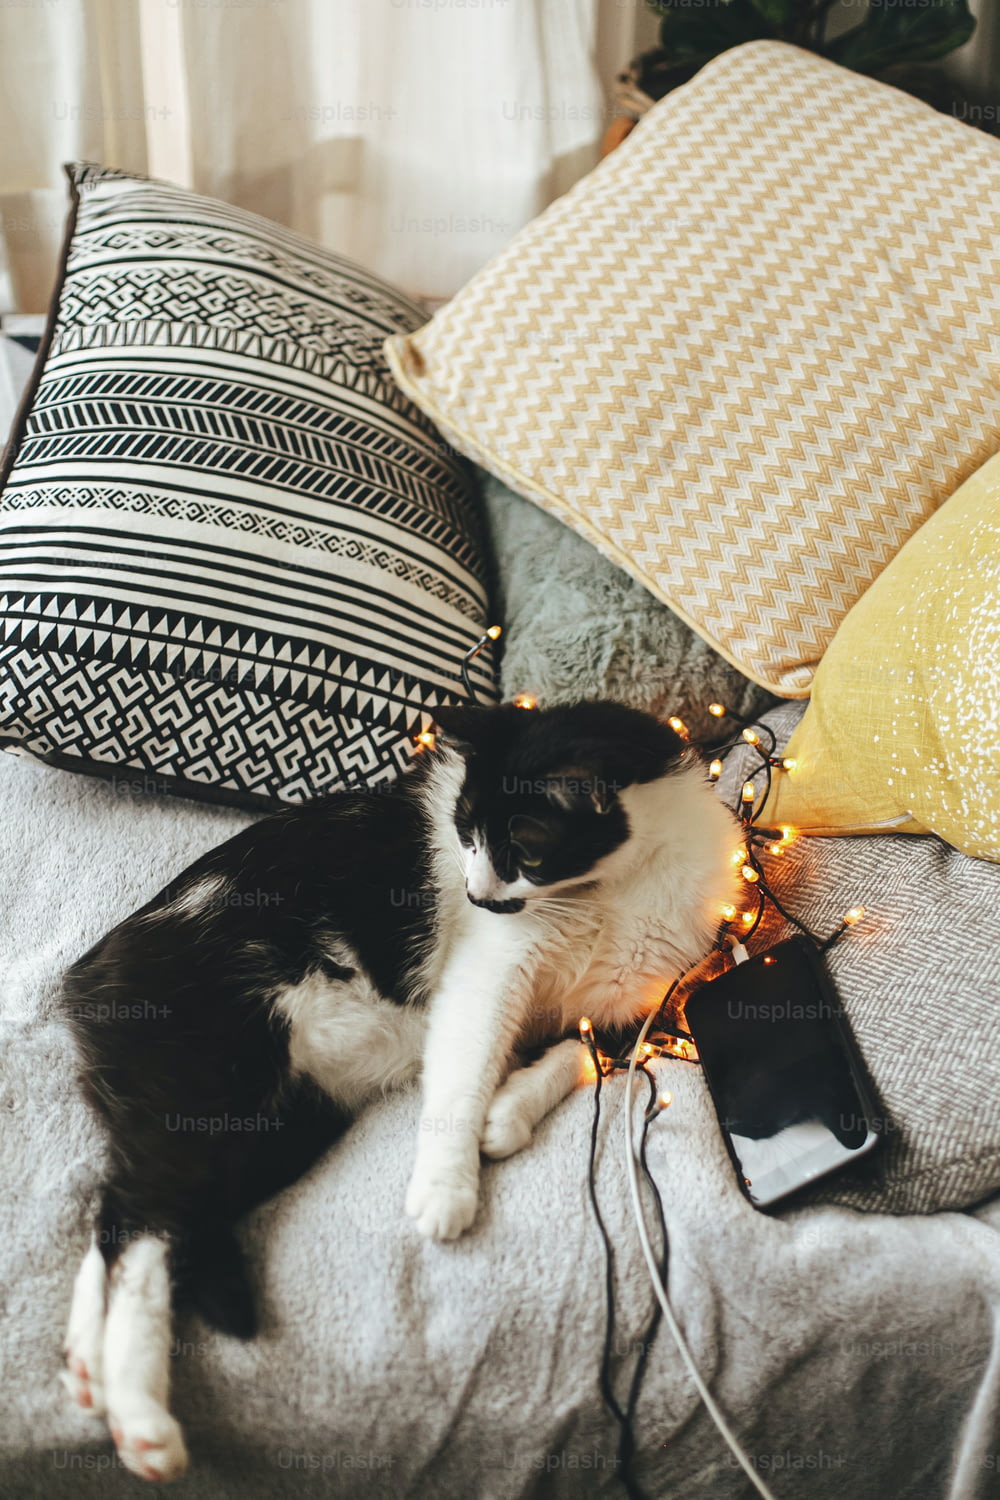 Cute cat lying on soft bed with charging phone and pillows in warm christmas lights. Adorable black and white curious cat relaxing on cozy blanket in festive room, happy holidays